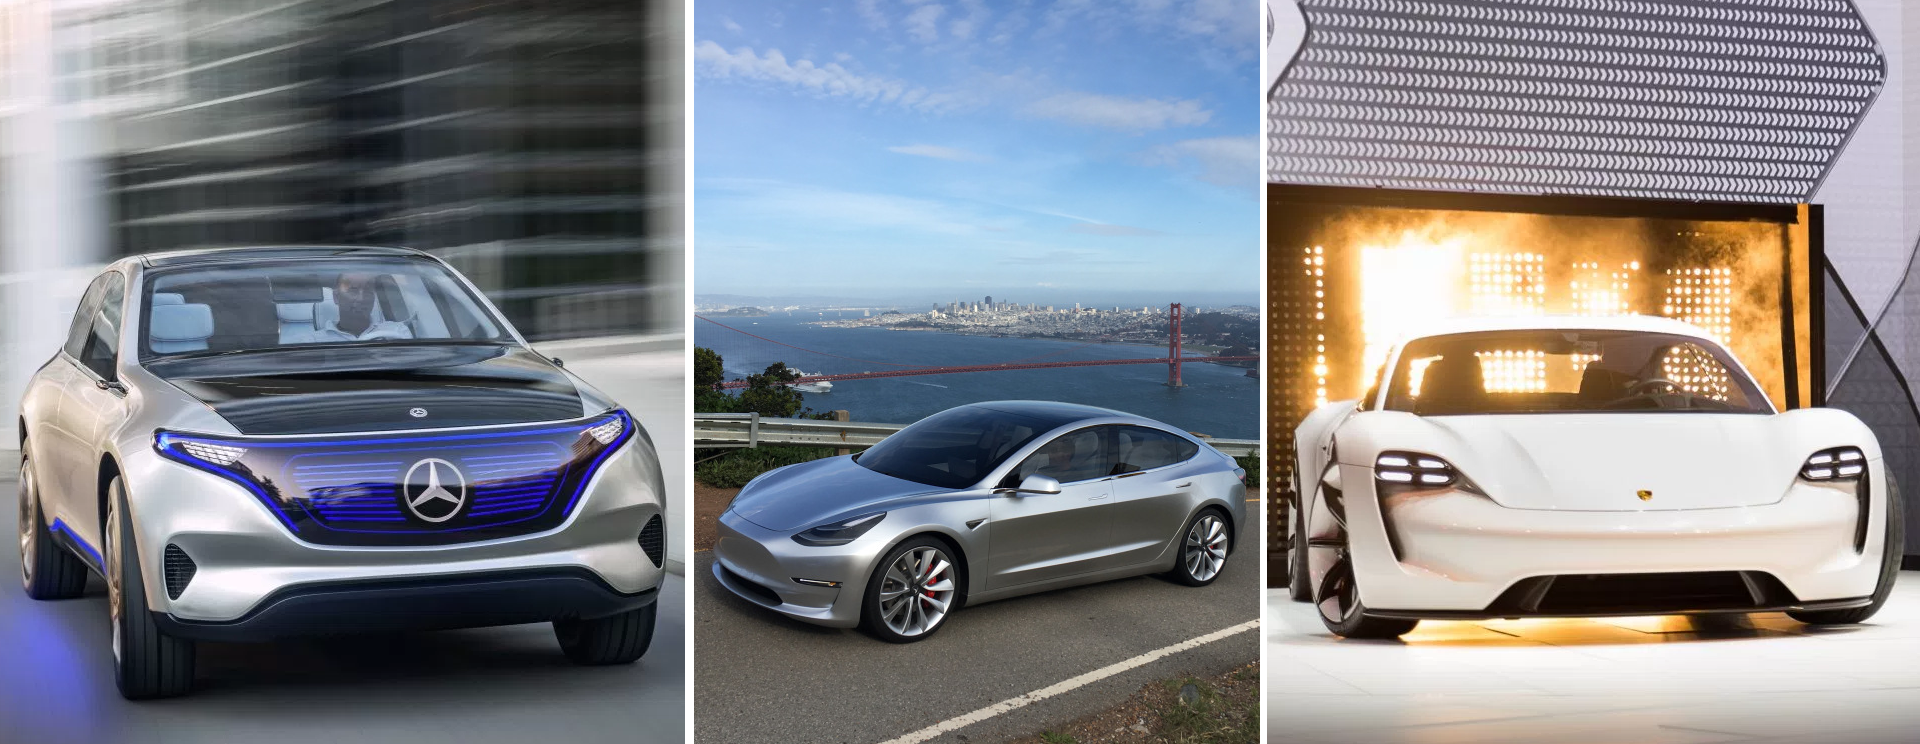 10 electric cars coming in the next 3 years Electrek